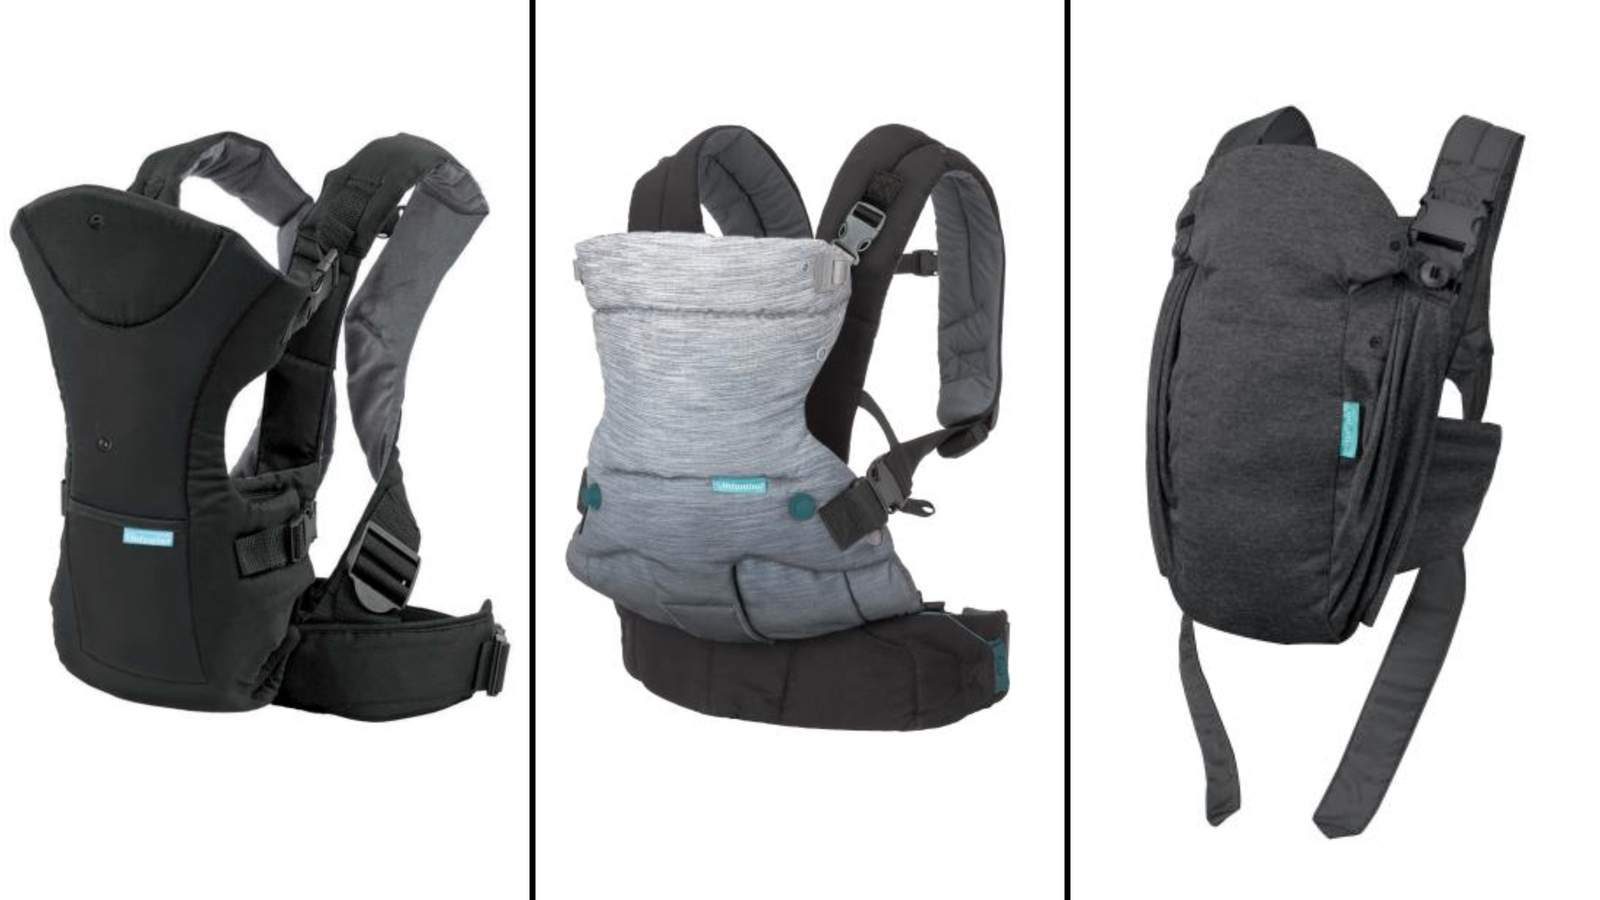 Baby carriers sold at Target and Amazon are recalled because a child could fall out